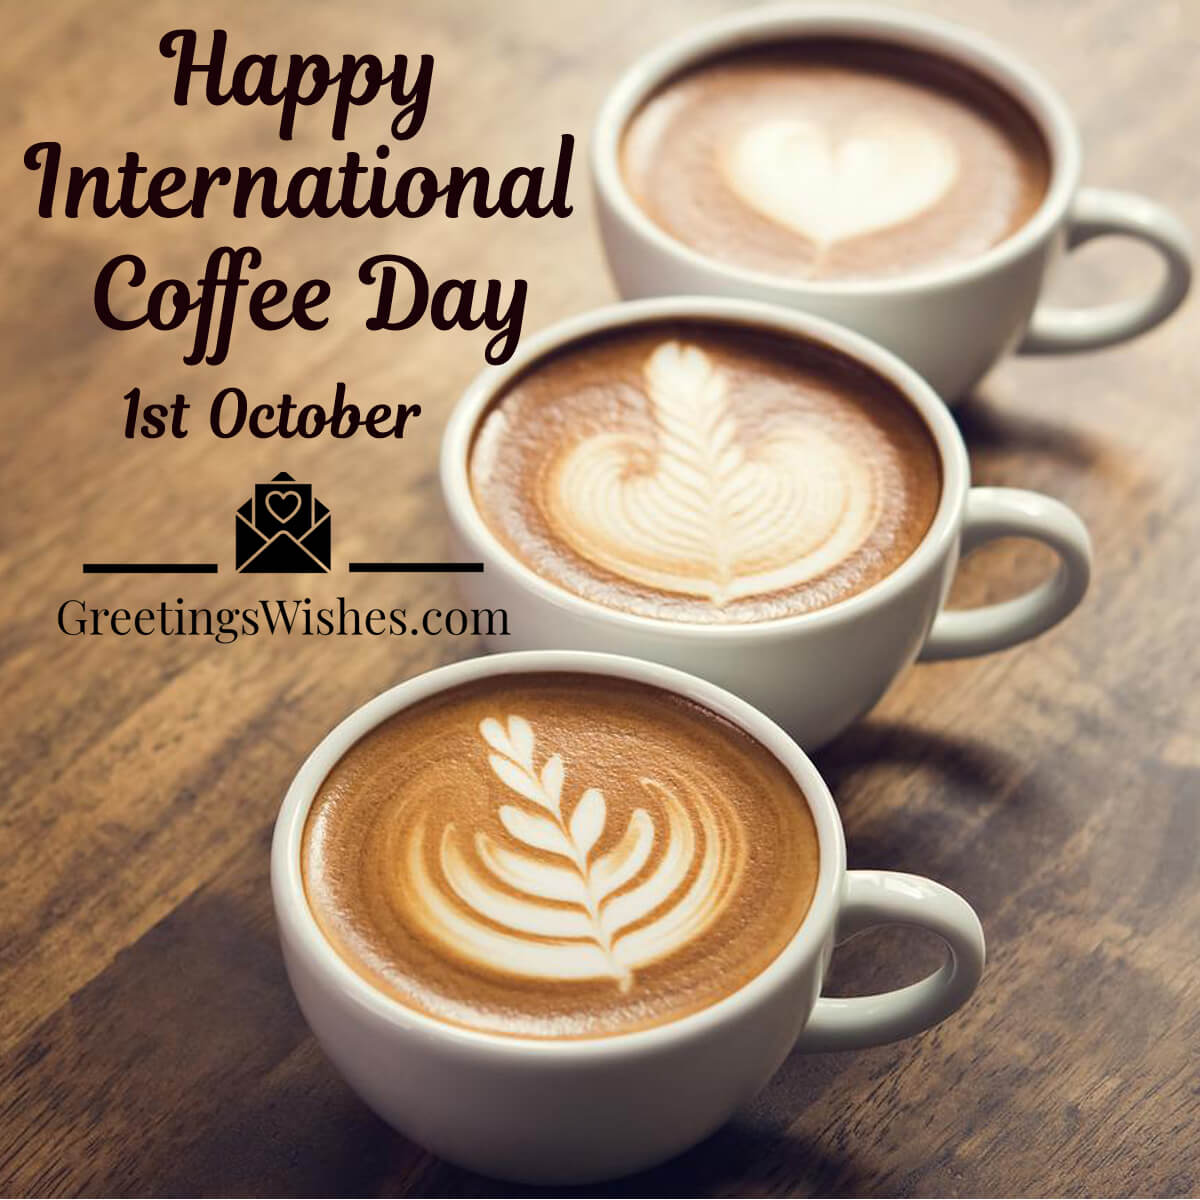 International Coffee Day Images